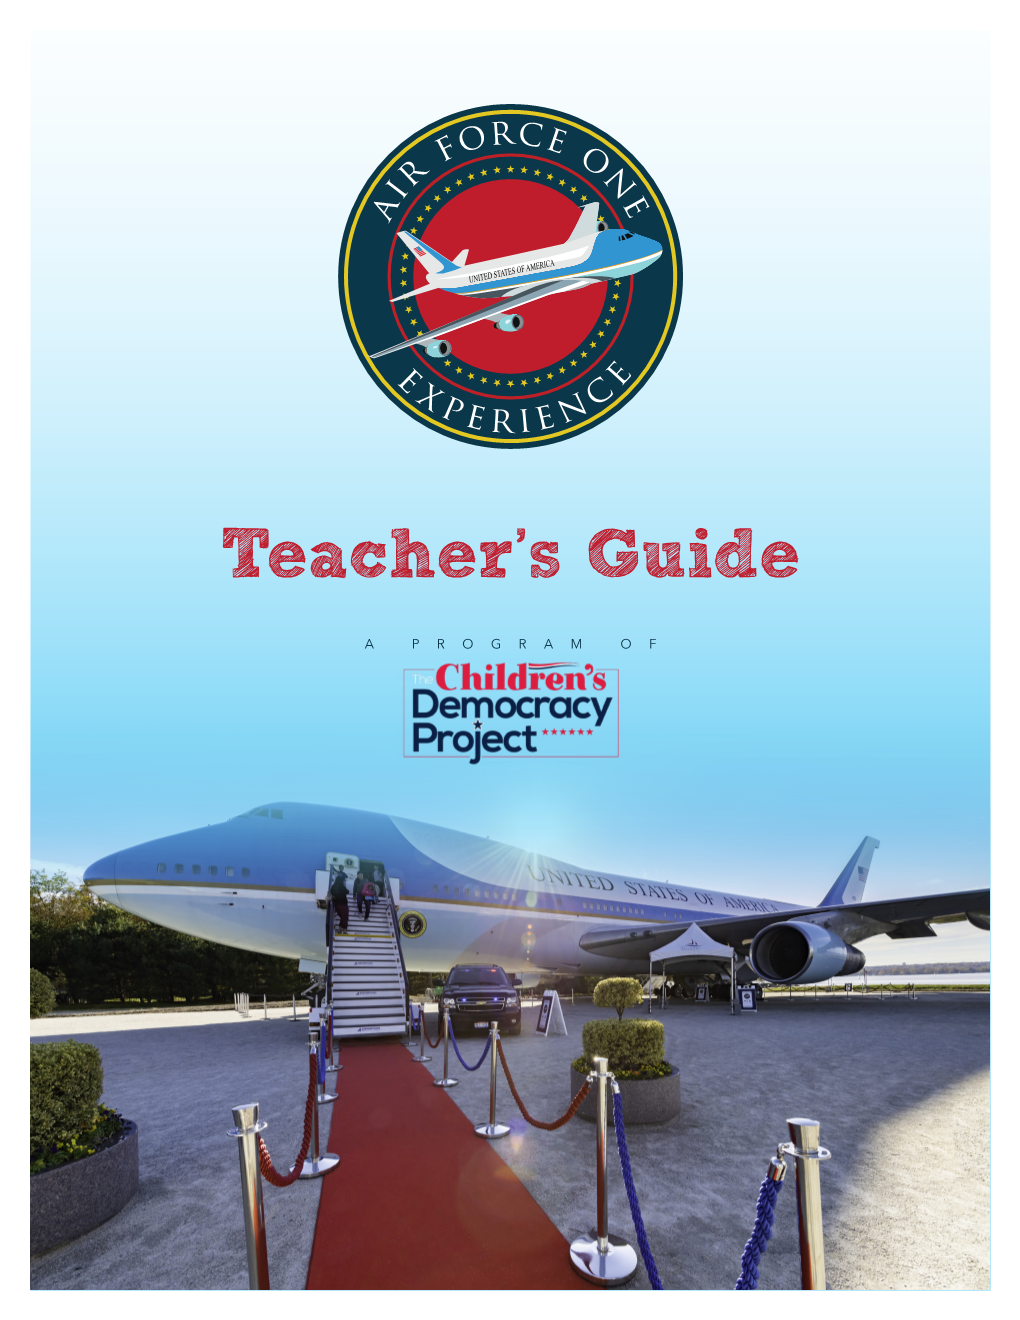 Teacher's Guide" Is Divided Into Three Sections